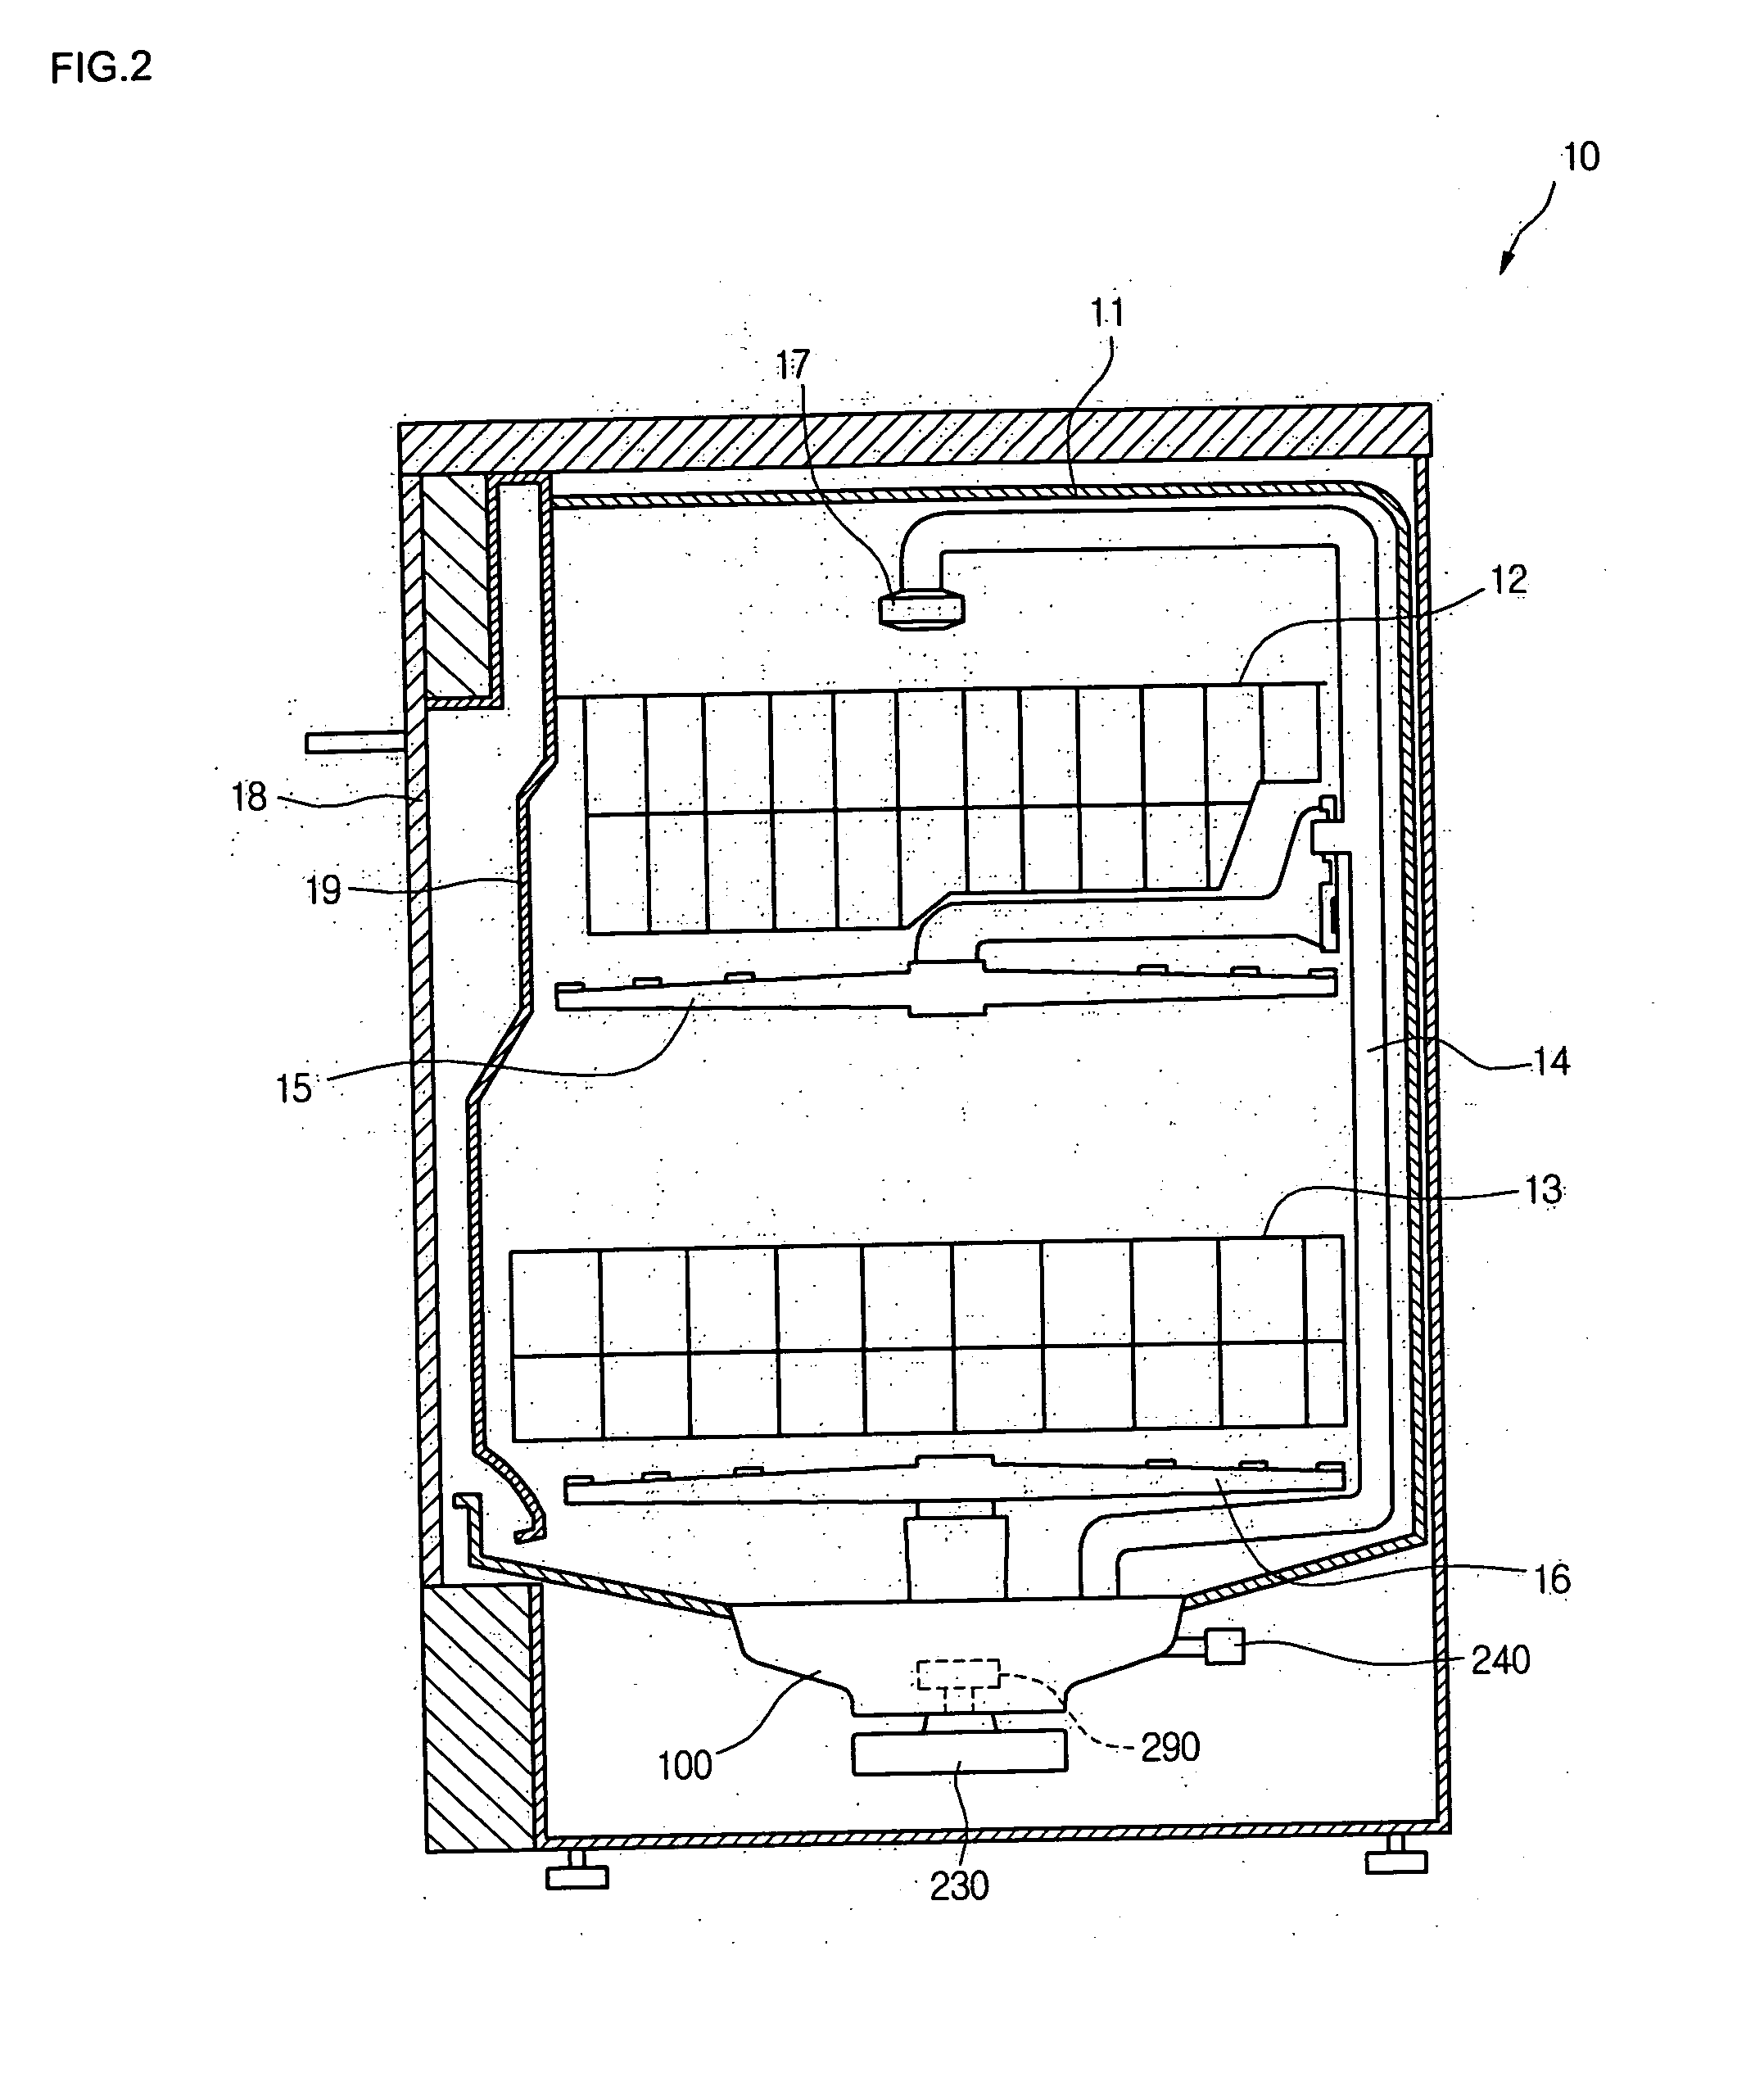 Dishwasher and method of controlling the same